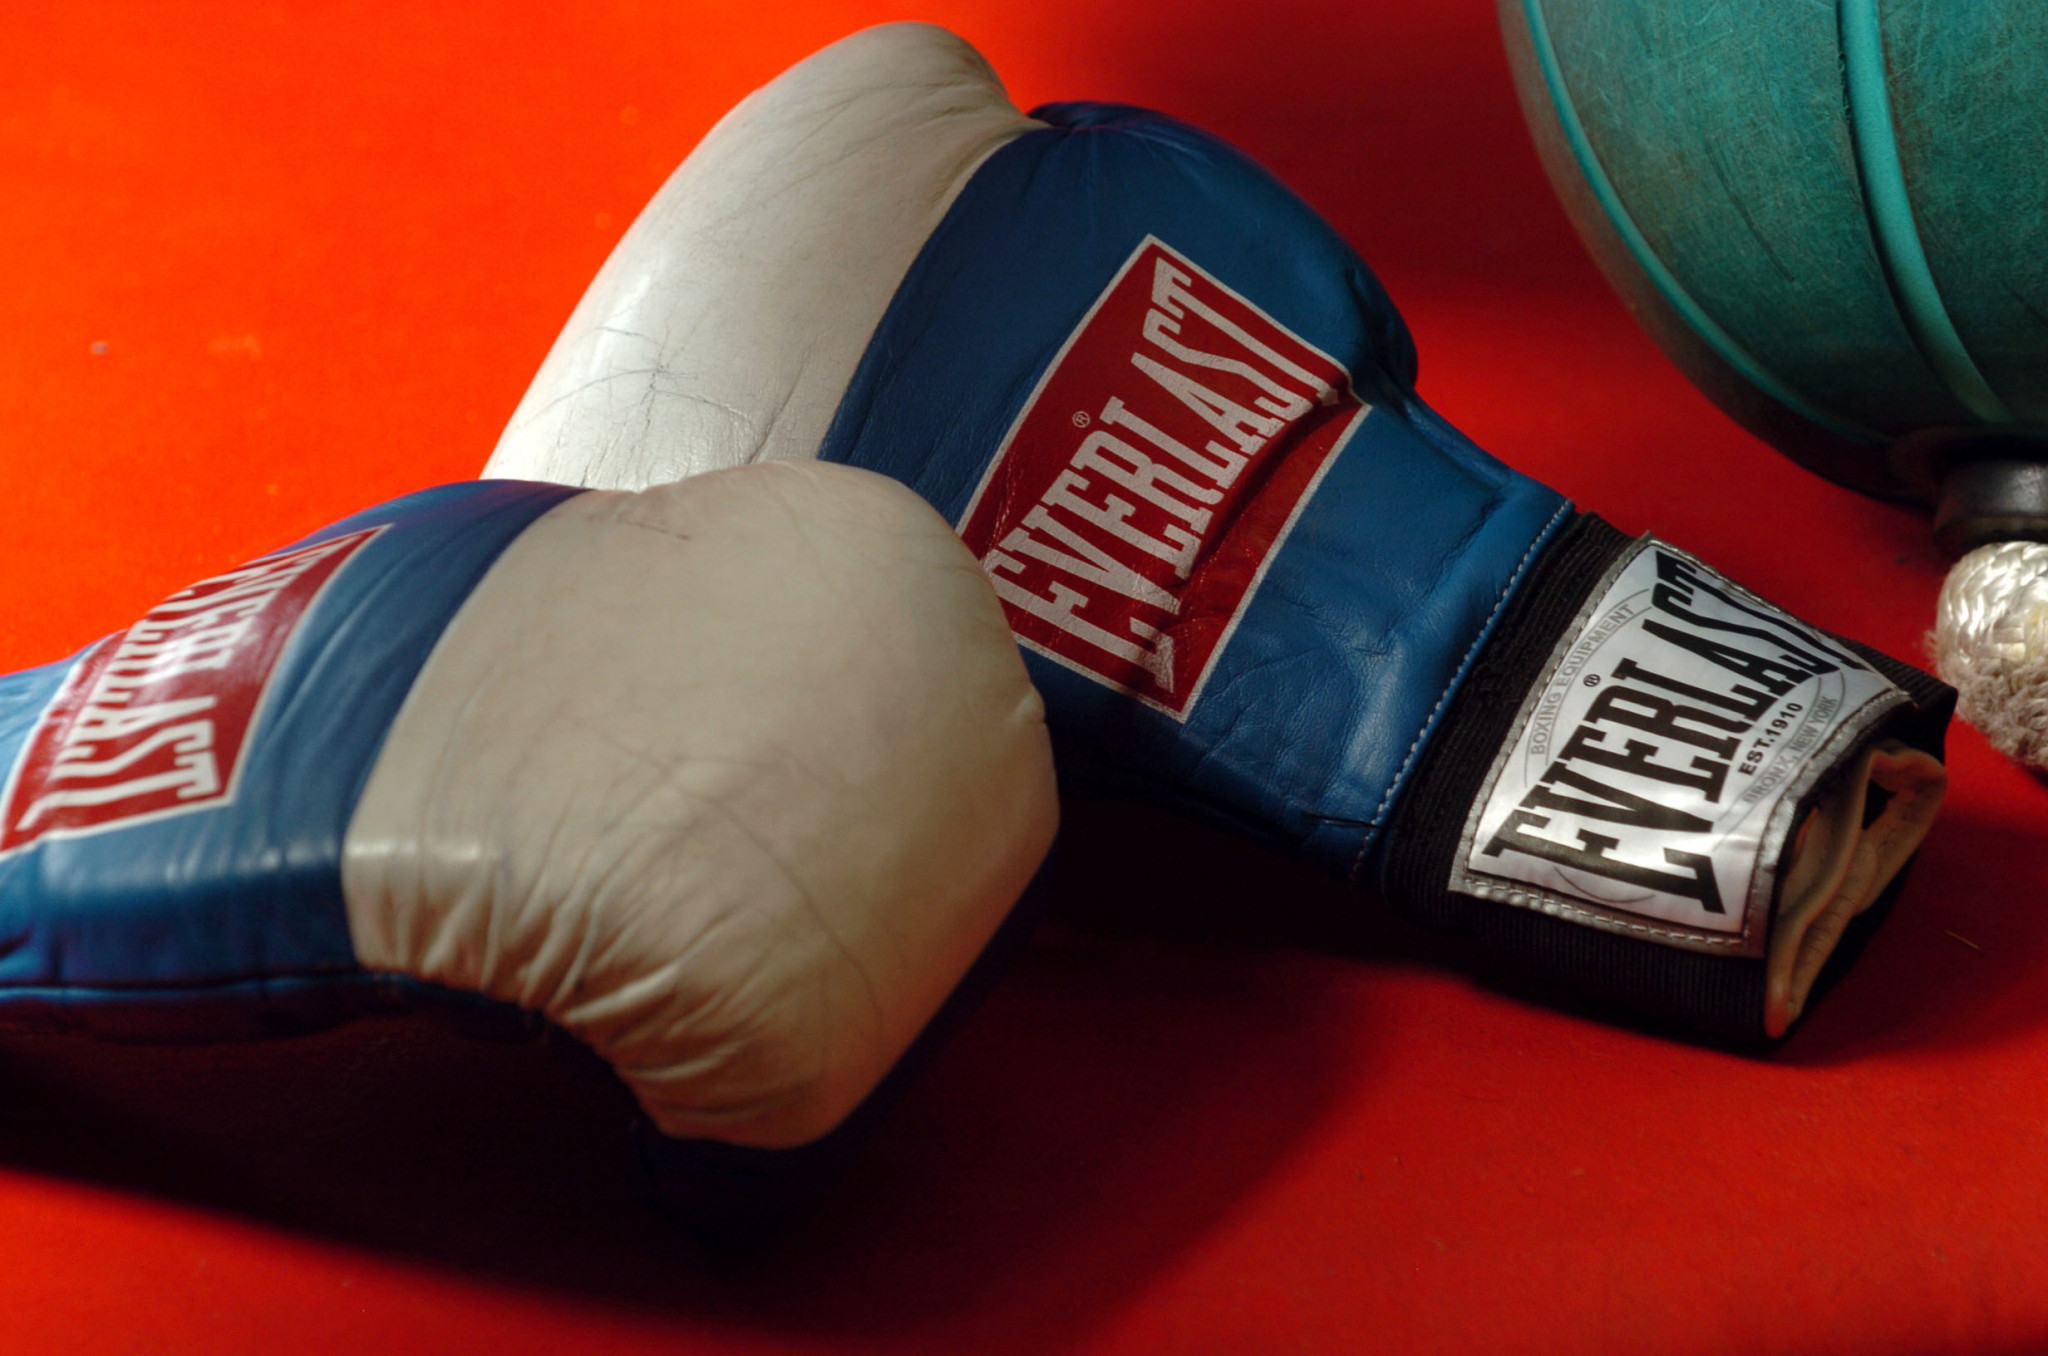 Fryers and Sweeney win as Ireland dominate again at European Women's Boxing Championships